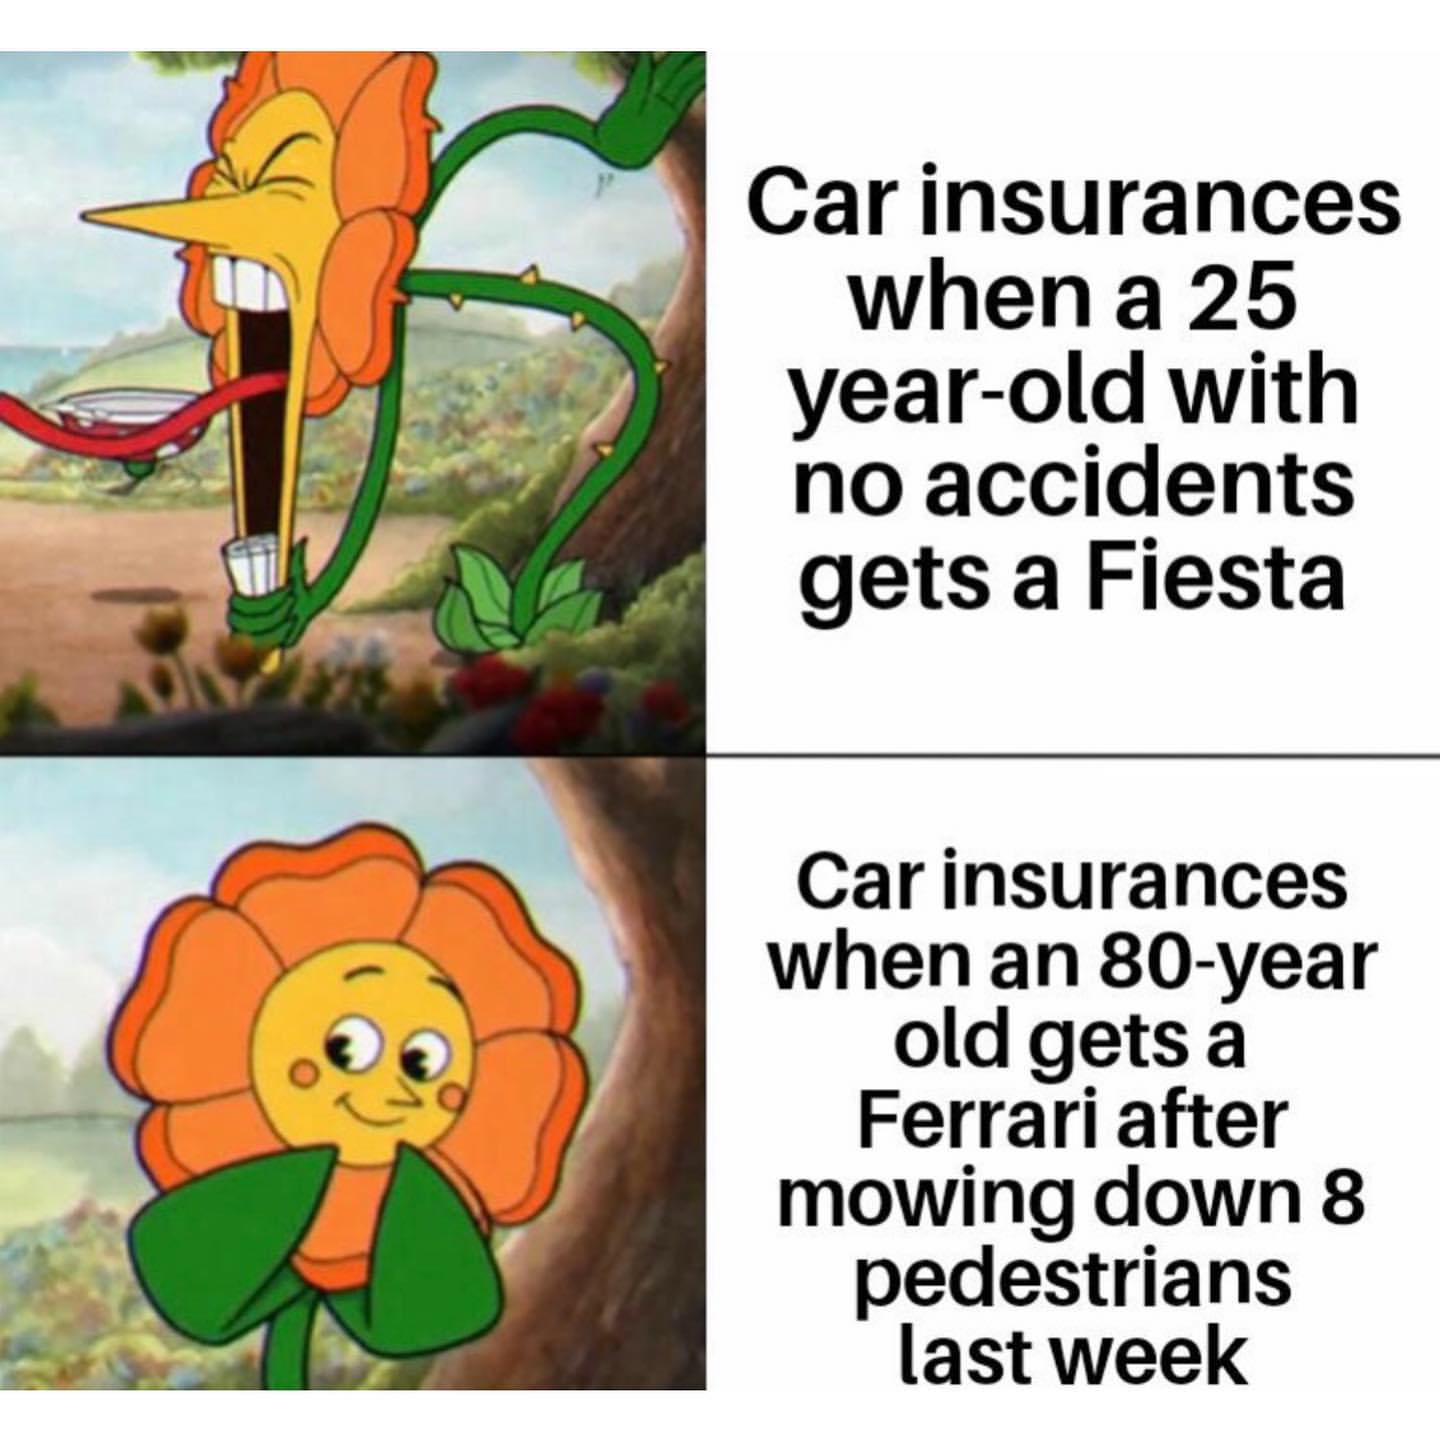 Car insurances when a 25 year-old with no accidents gets a Fiesta. Car insurances when an 80-year old gets a Ferrari after mowing down 8 pedestrians last week.